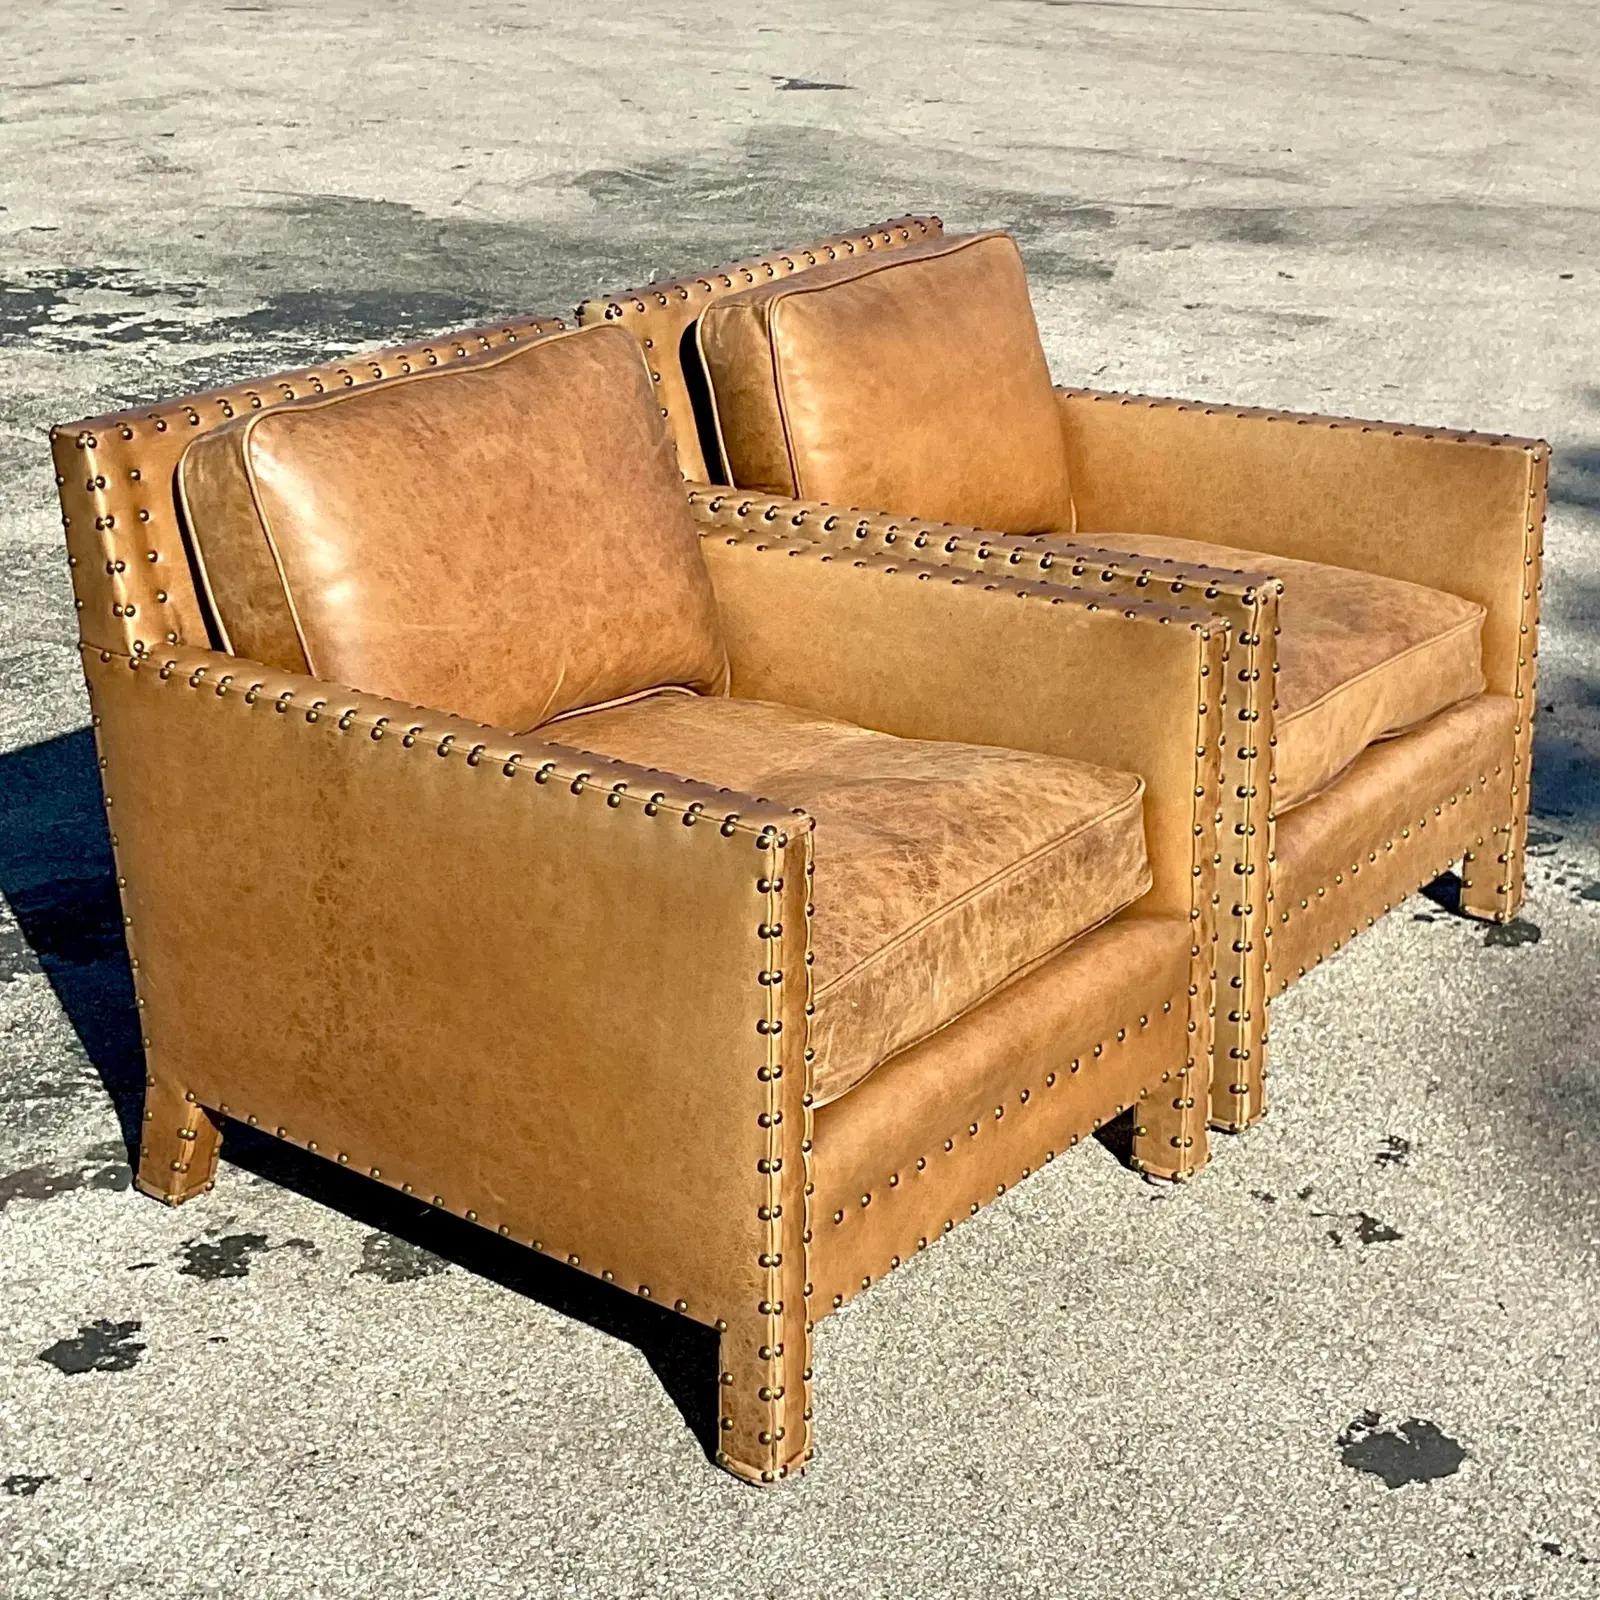 20th Century Vintage Ralph Lauren Nailhead Distressed Leather Lounge Chairs - a Pair